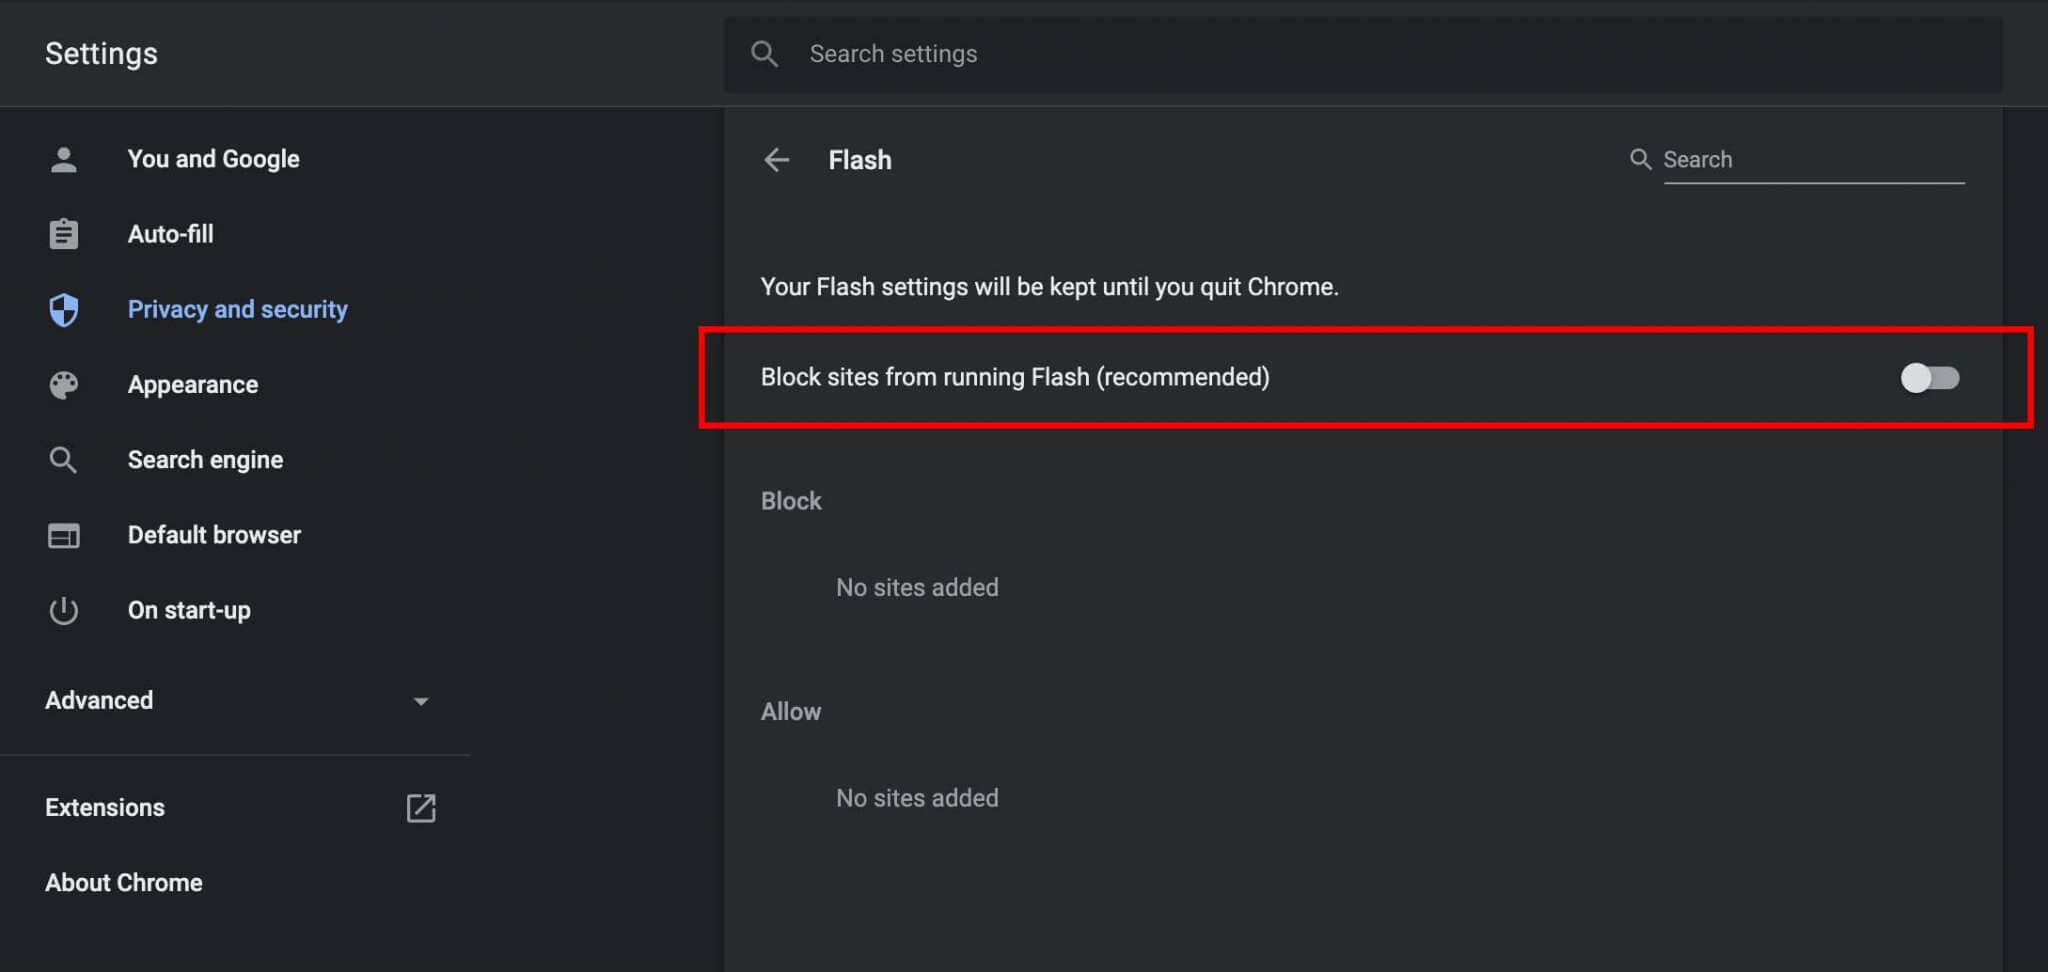 enables flash for chrome